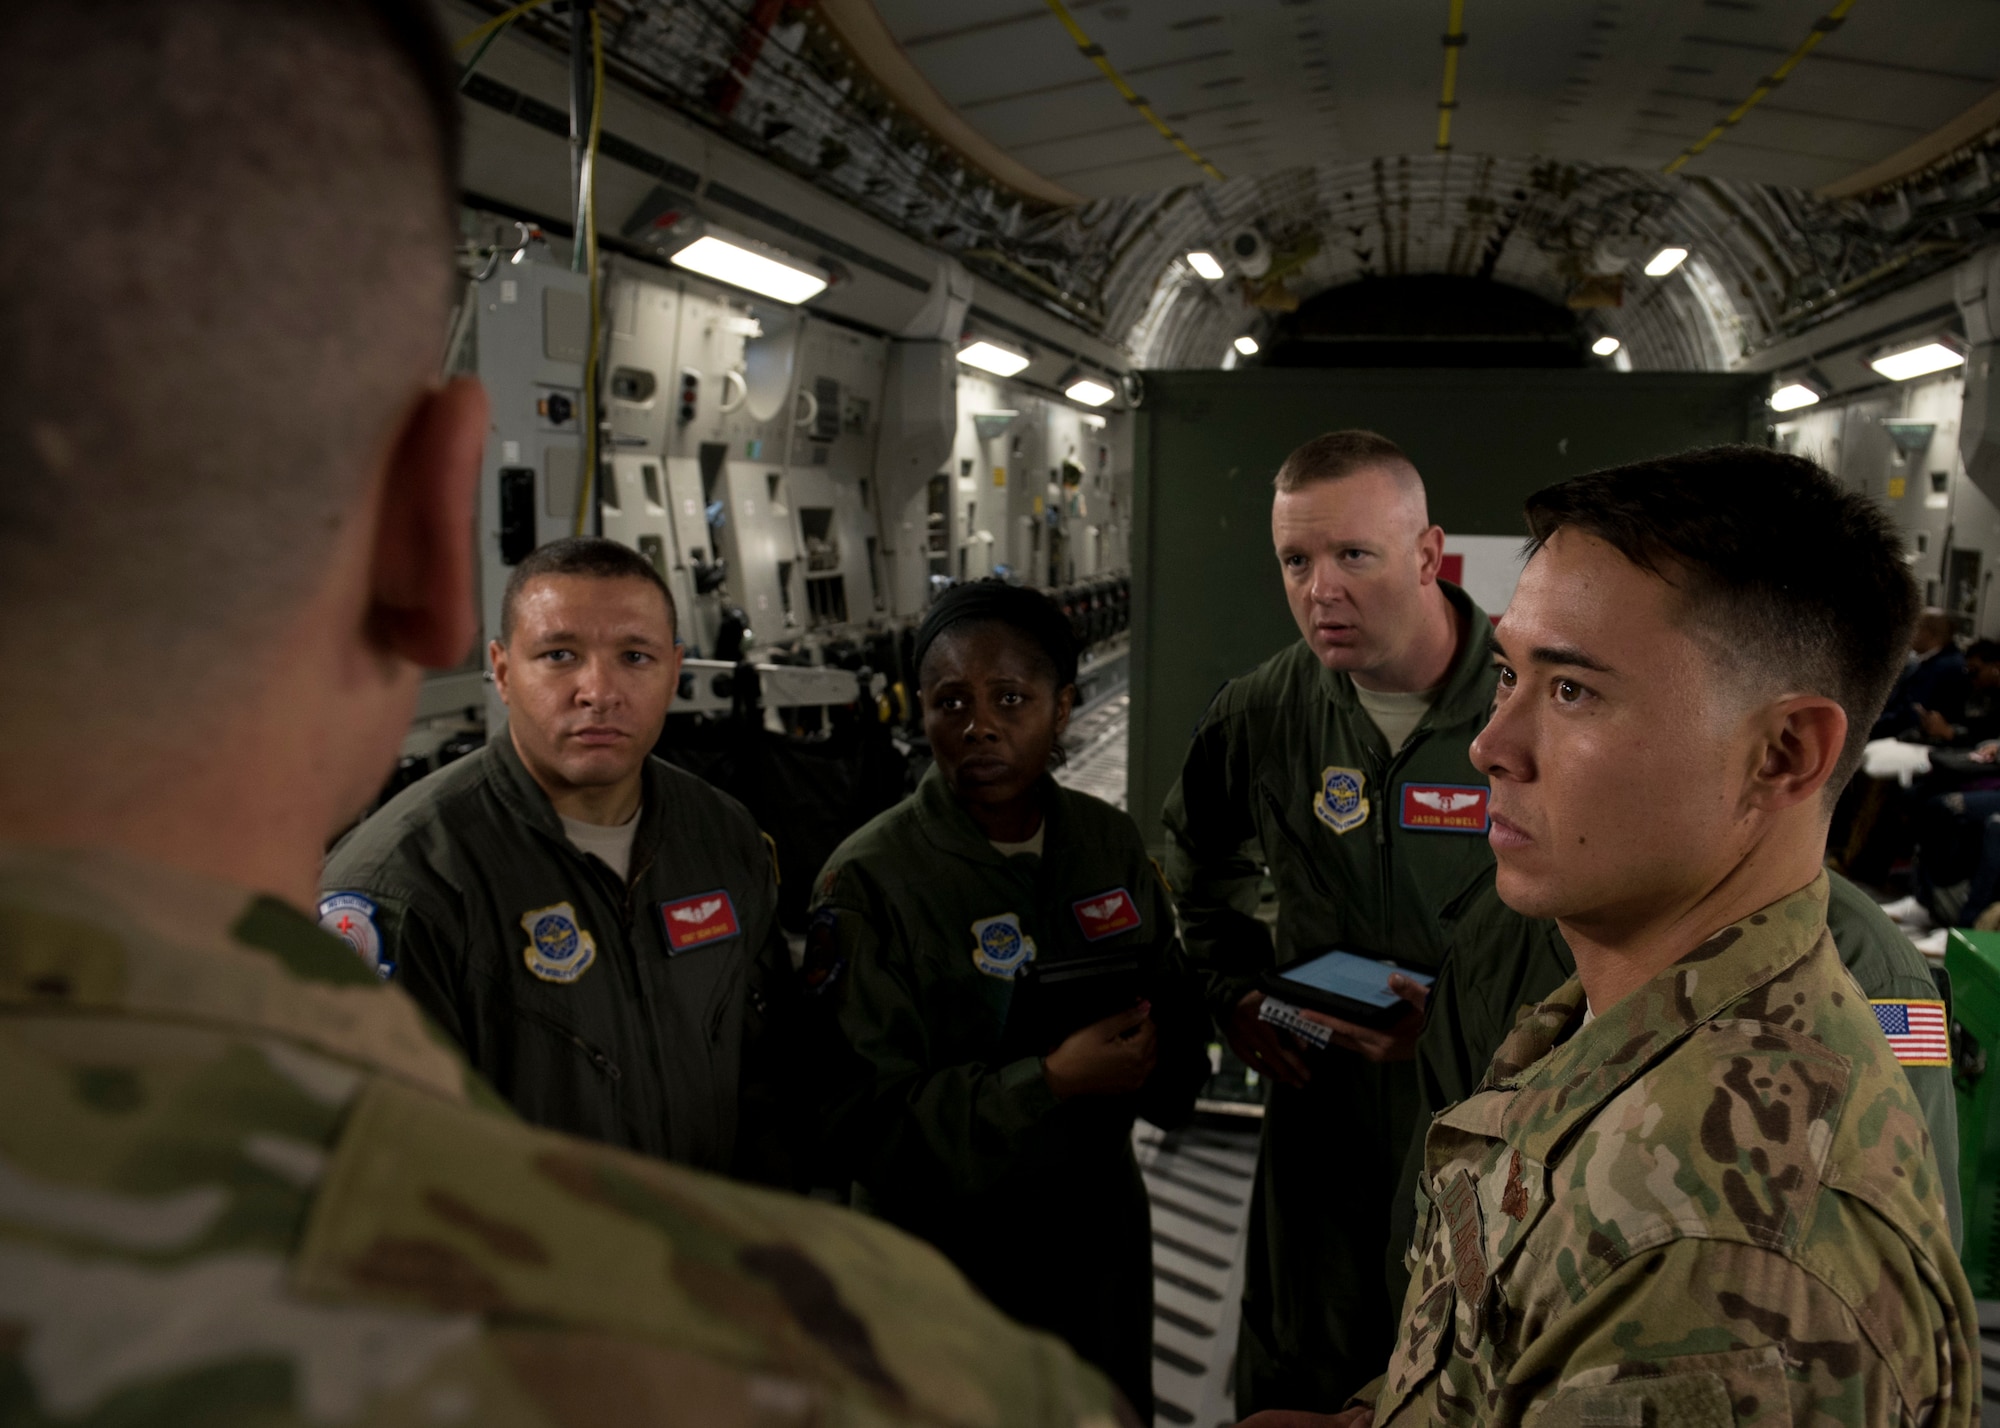 Tech. Sgt. John Brenden, 21st Airlift Squadron loadmaster, briefs aeromedics from the 375th Aeromedical Evacuation Squadron and Capt. Kai Yamashiro, 21st AS C-17 Globemaster III pilot, on egress procedures and his load plan at Travis Air Force Base, Calif., May 13, 2018. A 21st AS C-17 embarked on an AE mission supporting aerial transport of patients at various military bases in the Pacific. (U.S. Air Force photo by Lan Kim)